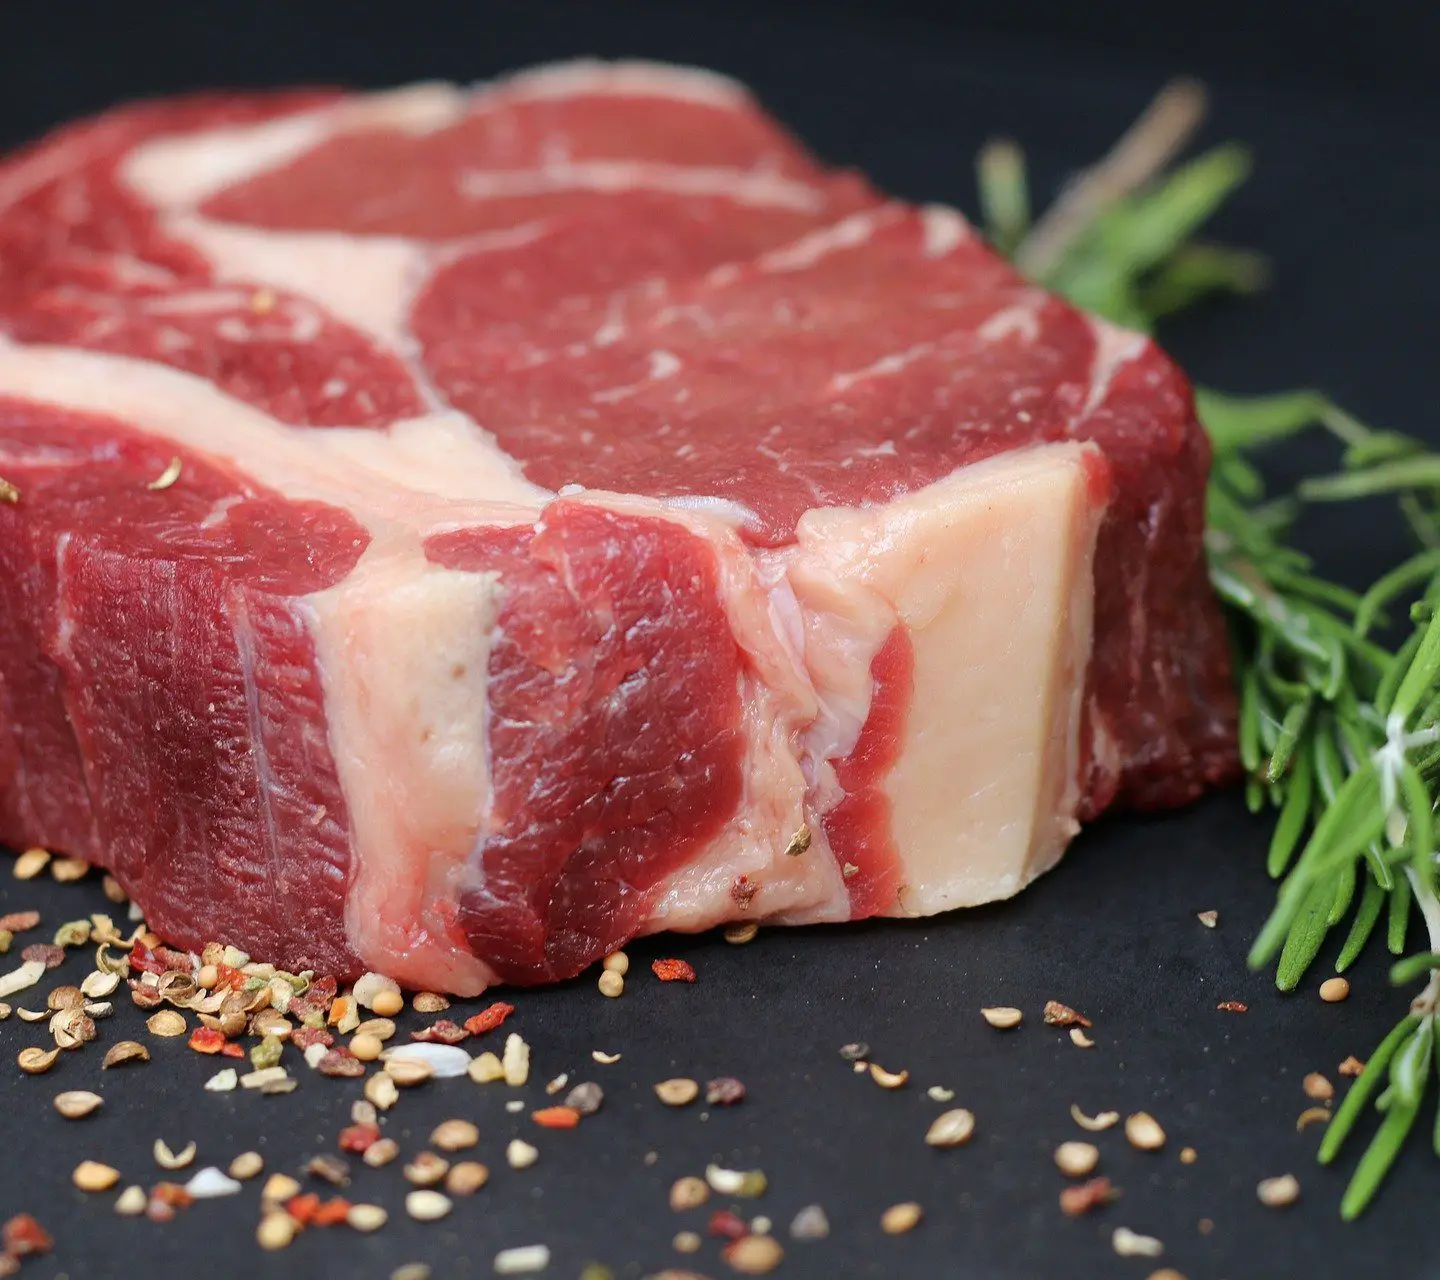 The Expert Tips: How to Succeed with your Meat